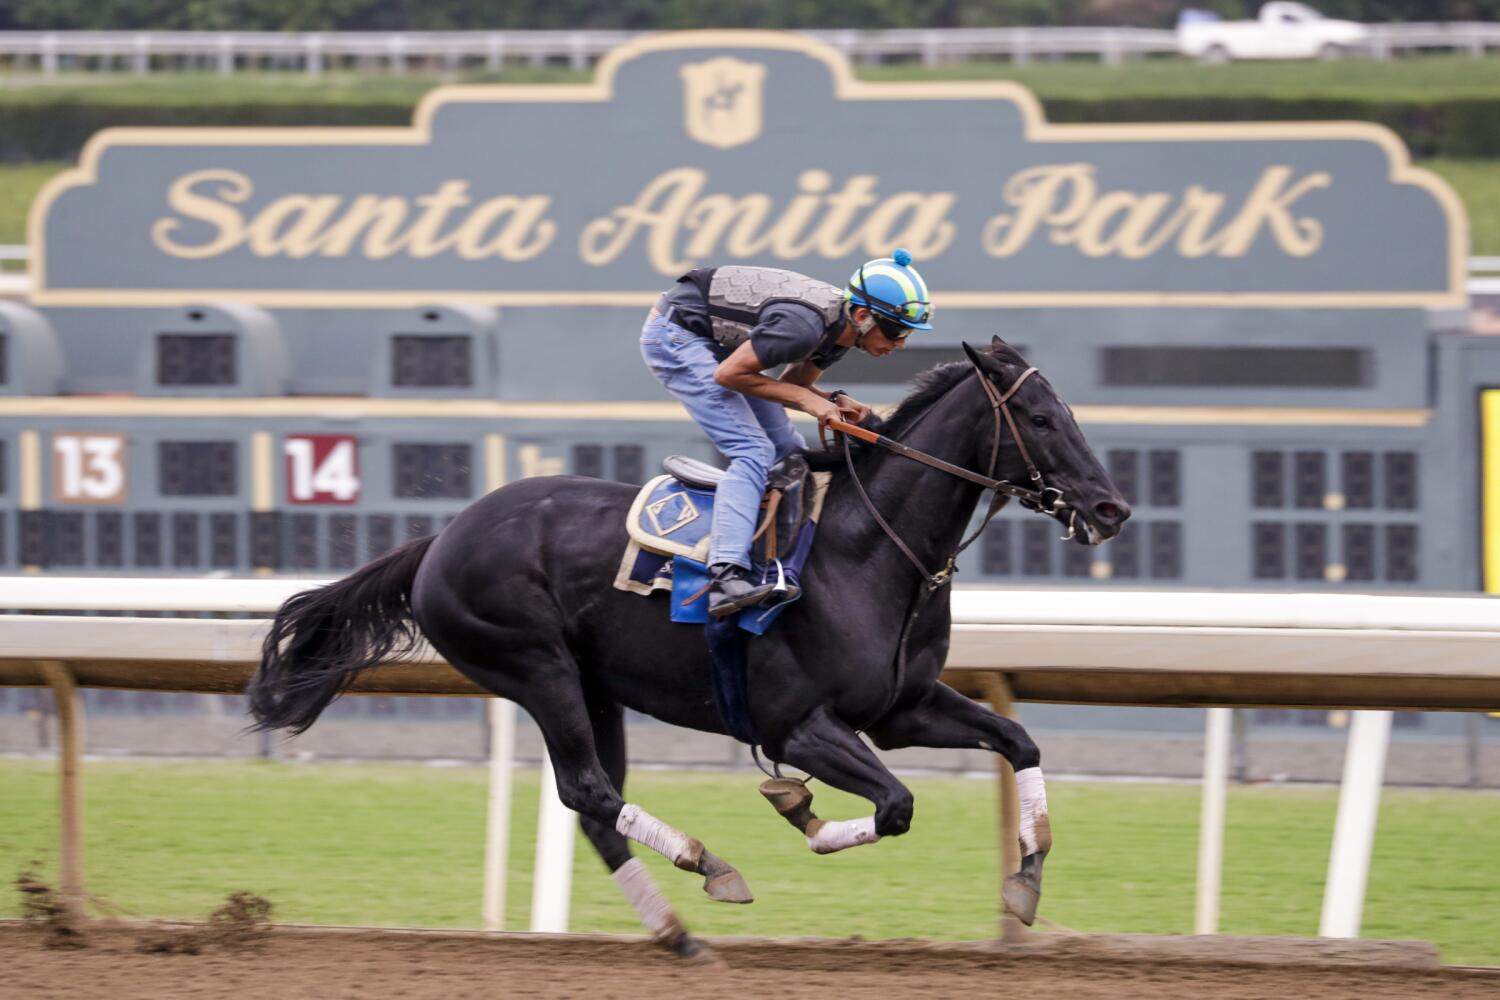 Q&A: How long can Santa Anita Park survive? 'If things don't get better...shorter window'